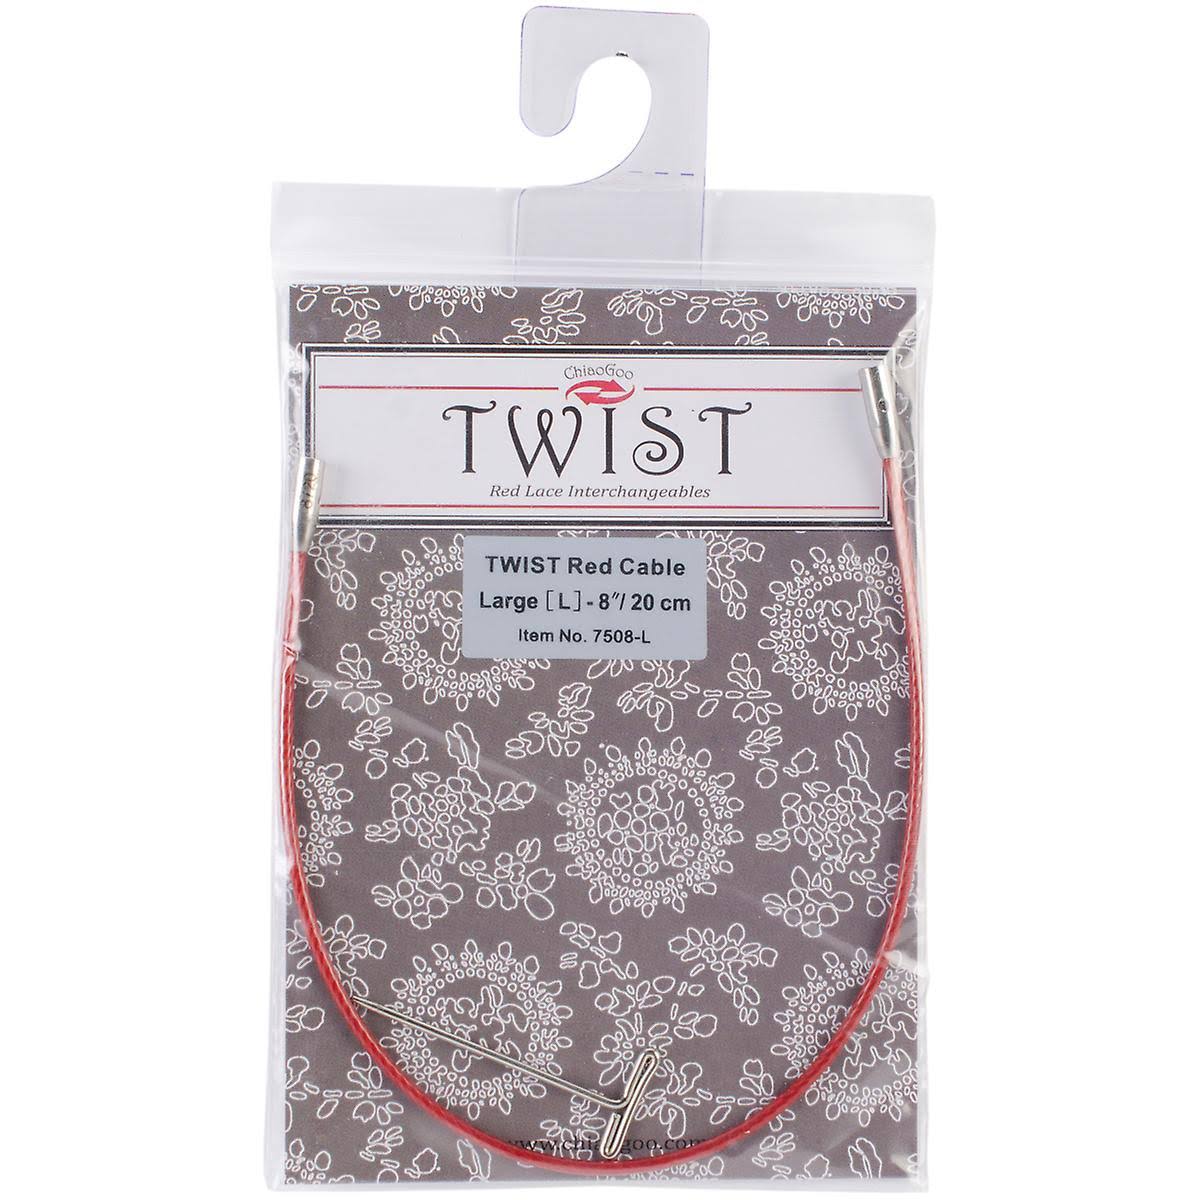 Chiaogoo Twist Red Lace Interchangeable Cables - 8", Large